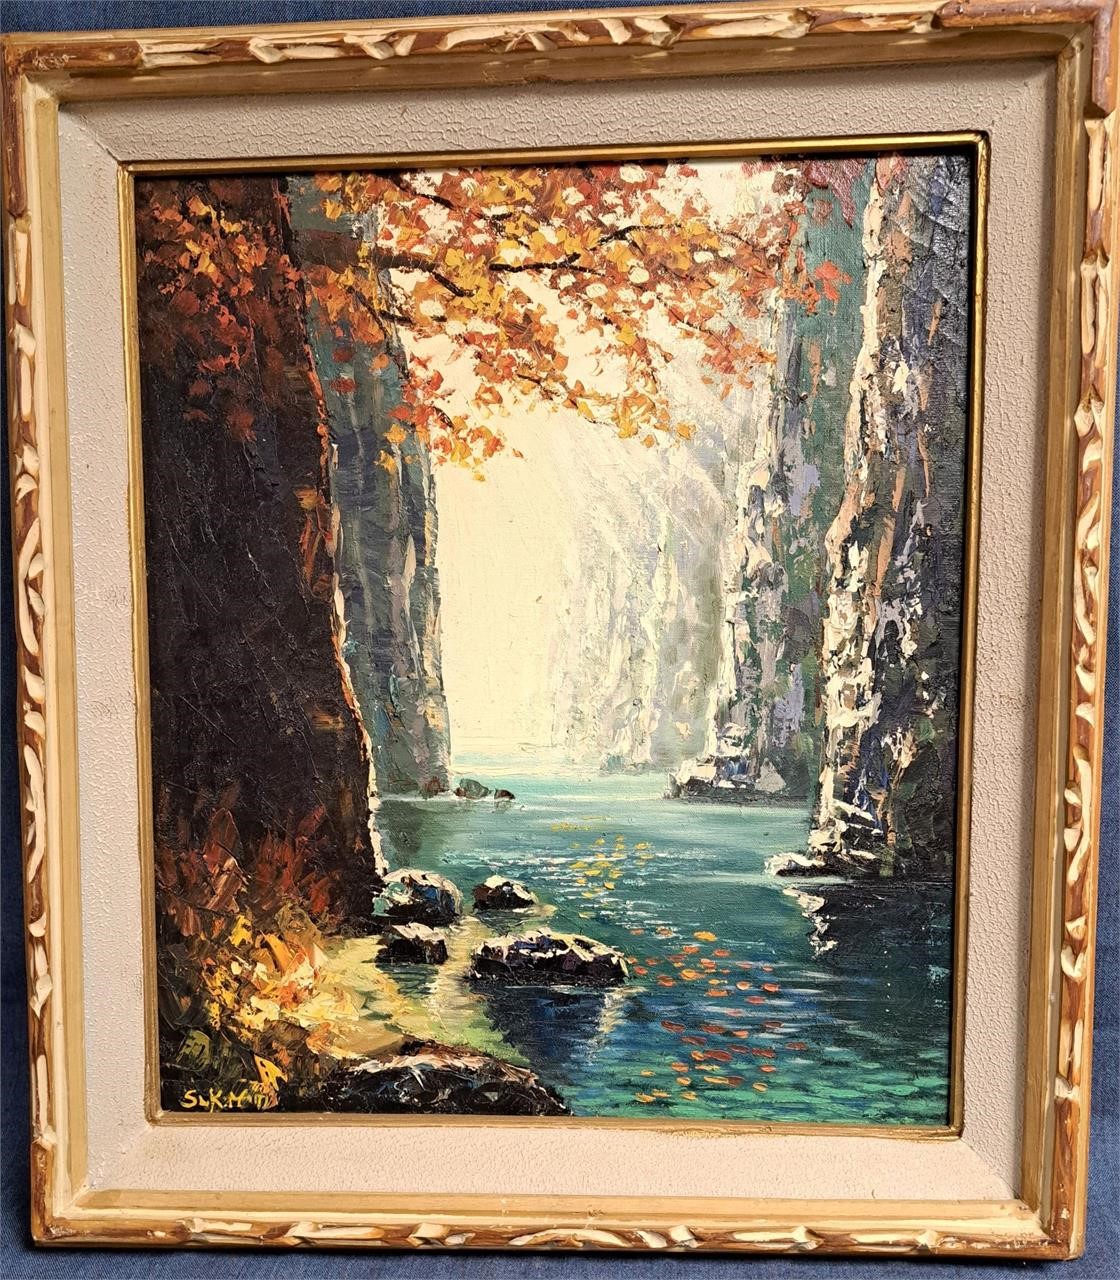 ORIGINAL FRAMED PAINTING FROM KOREA SIGNED SEE PIC